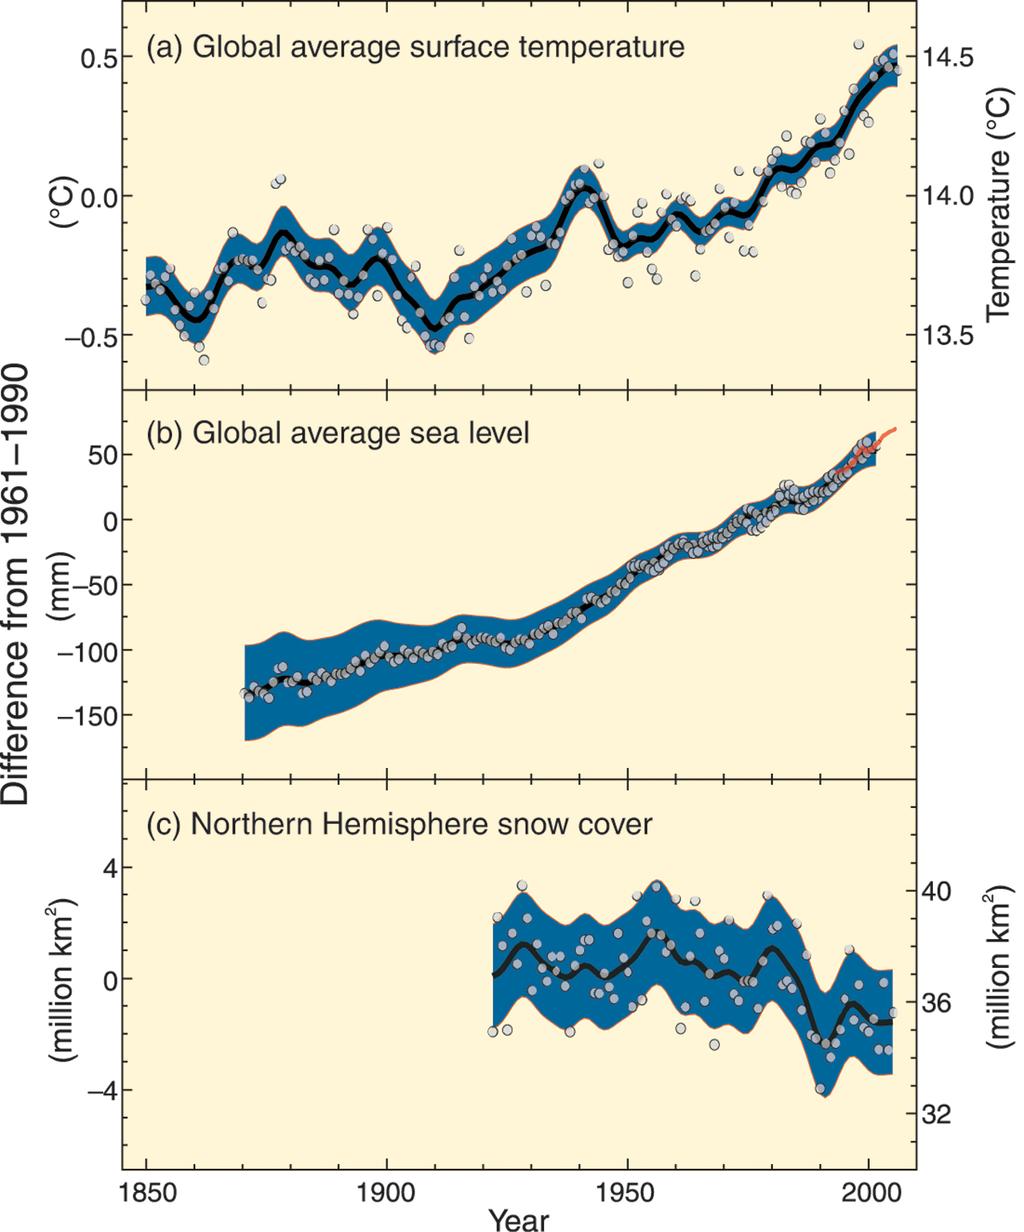 Global Warming IPCC. 2007. Climate Change 2007: Synthesis Report.